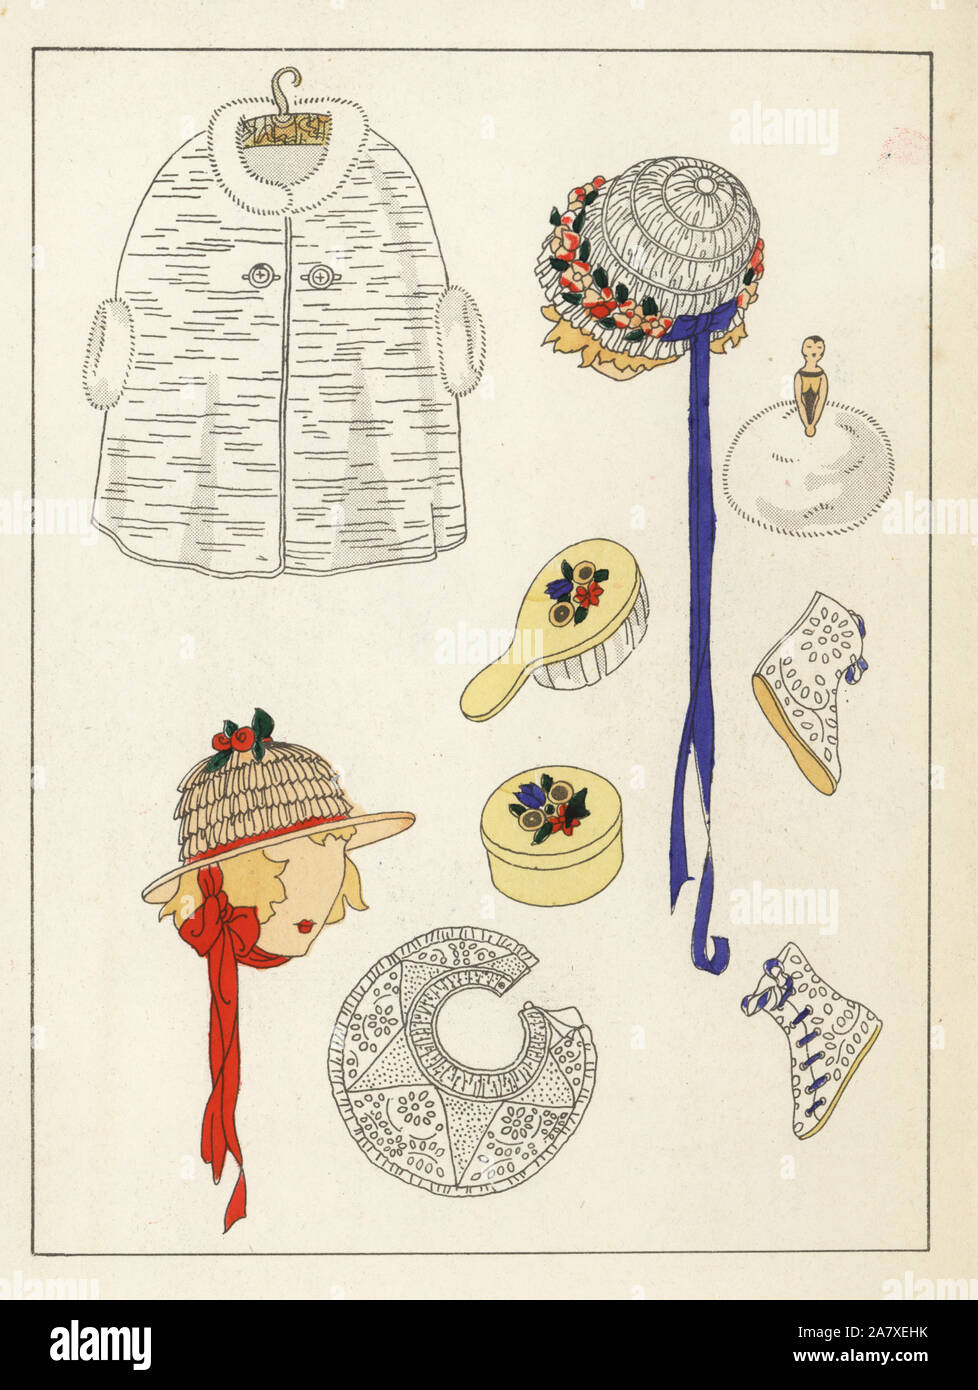 Children's hats, bootees, visor, brush and cape with fur trim. Handcolored pochoir (stencil) lithograph from the French luxury fashion magazine Art, Gout, Beaute, 1923. Stock Photo